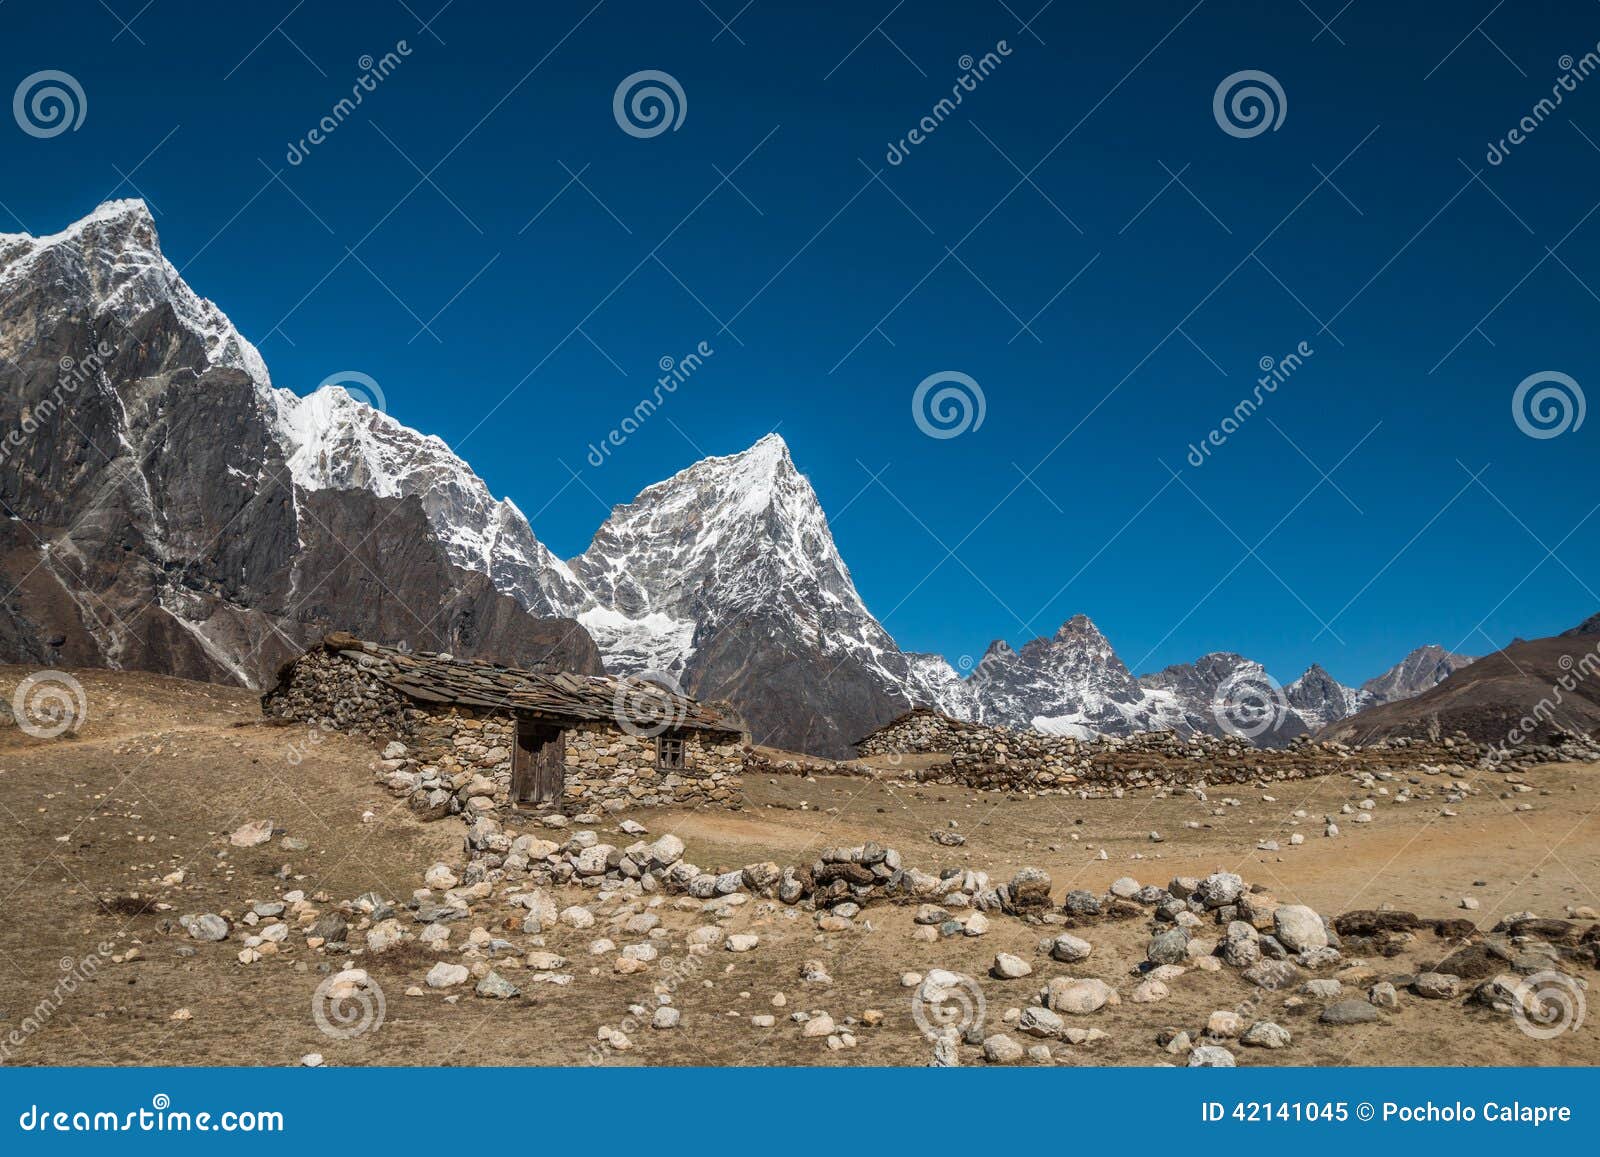 Valley Of Himalayan Mountains With Mountain Lake On Track To Everest Base  Camp. High Mountains With Snow-capped Peaks. Khumbu Valley, Sagarmatha  National Park, Nepal. Beautiful Mountain Landscape. Stock Photo, Picture  and Royalty